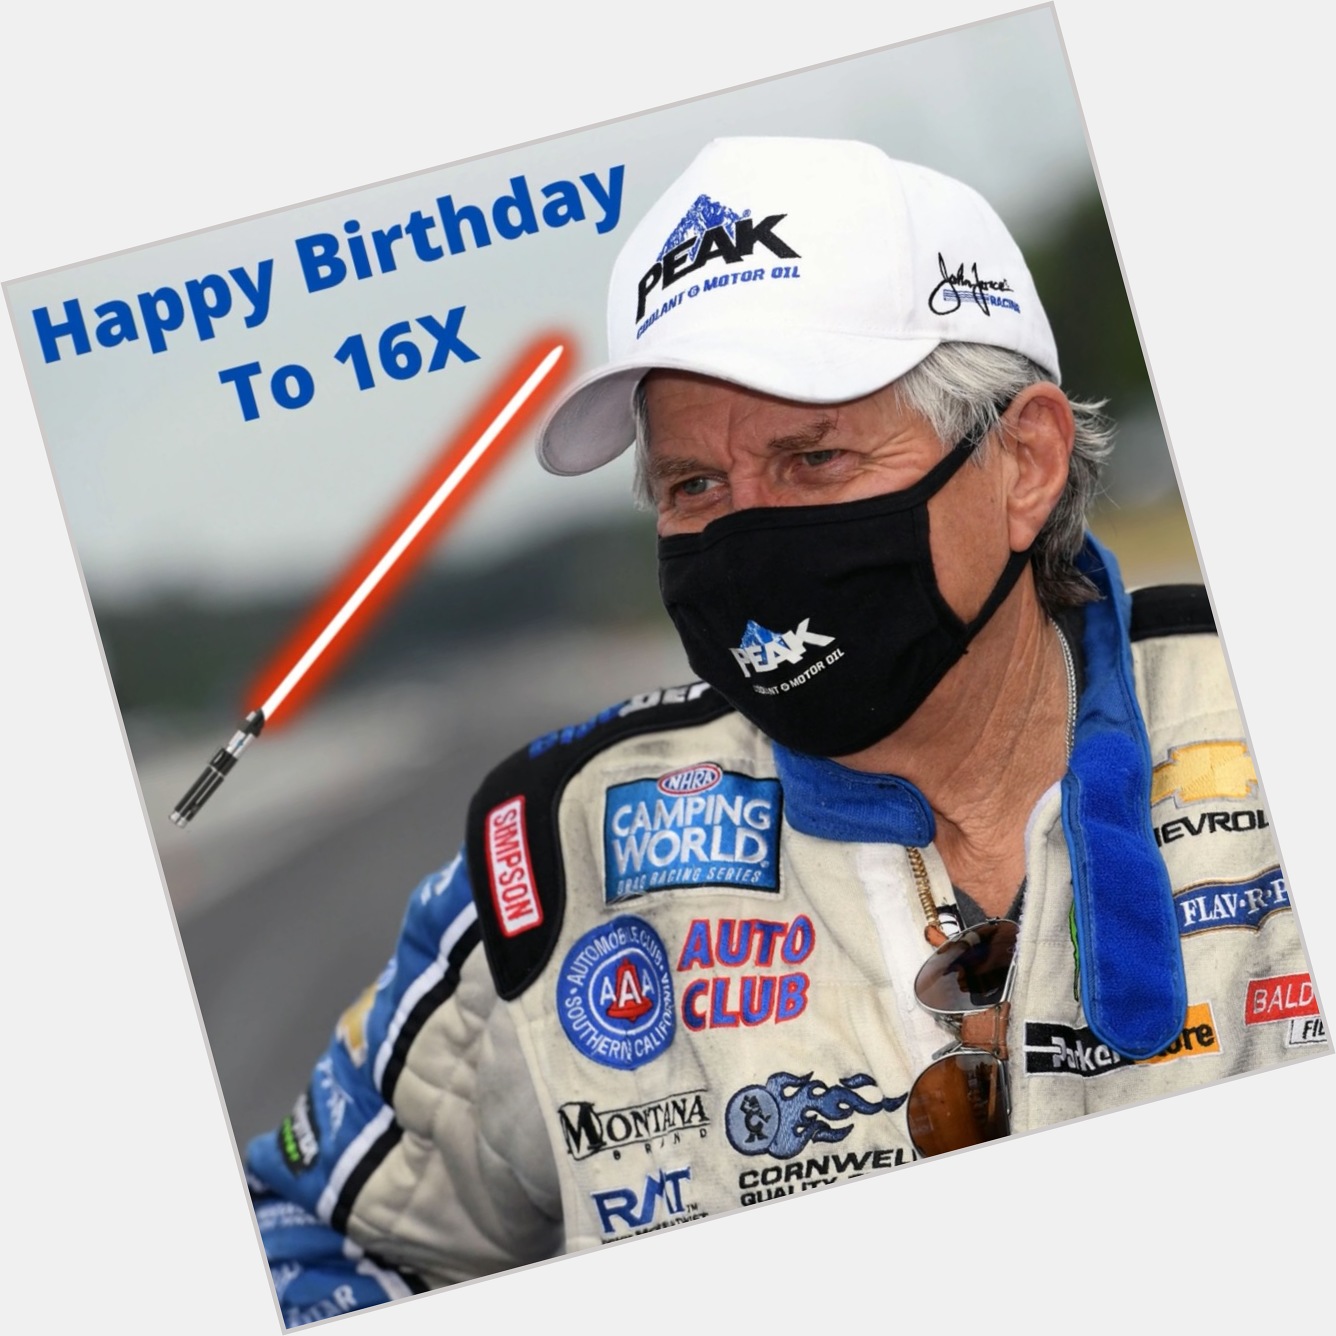 Everyone help us wish John Force a Happy Birthday in the comments.  